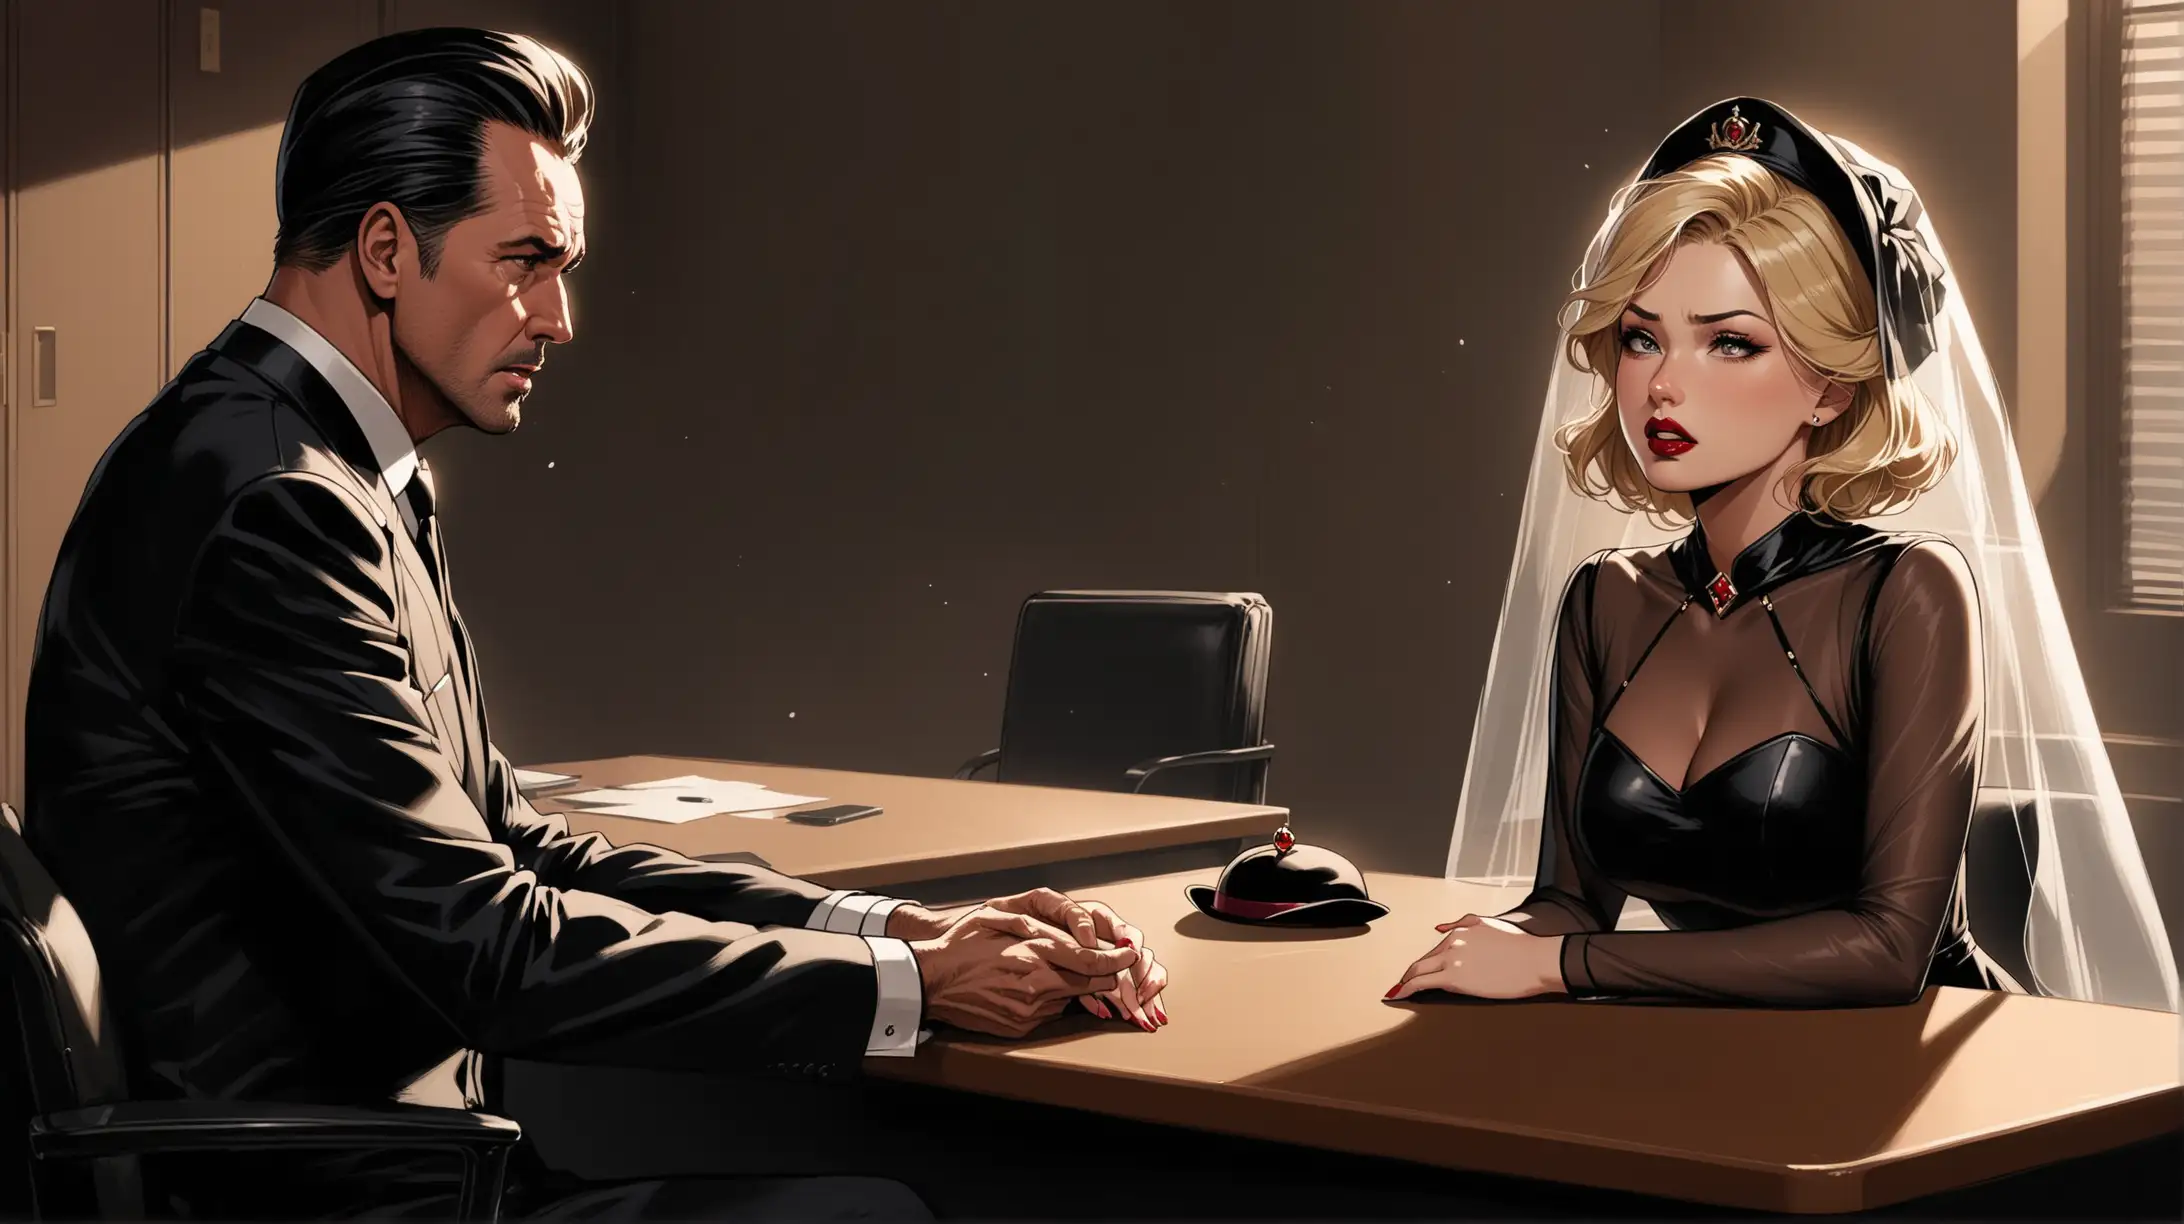 A full body of a A beautiful blonde woman with full red lips sits across from a man in his 50’s her facial expression is devastated. She wears a black small pin hat with a short black veil and a leather and sheer black dress. She demands answers from the man. He wears a black suit and sits calmly at his desk 